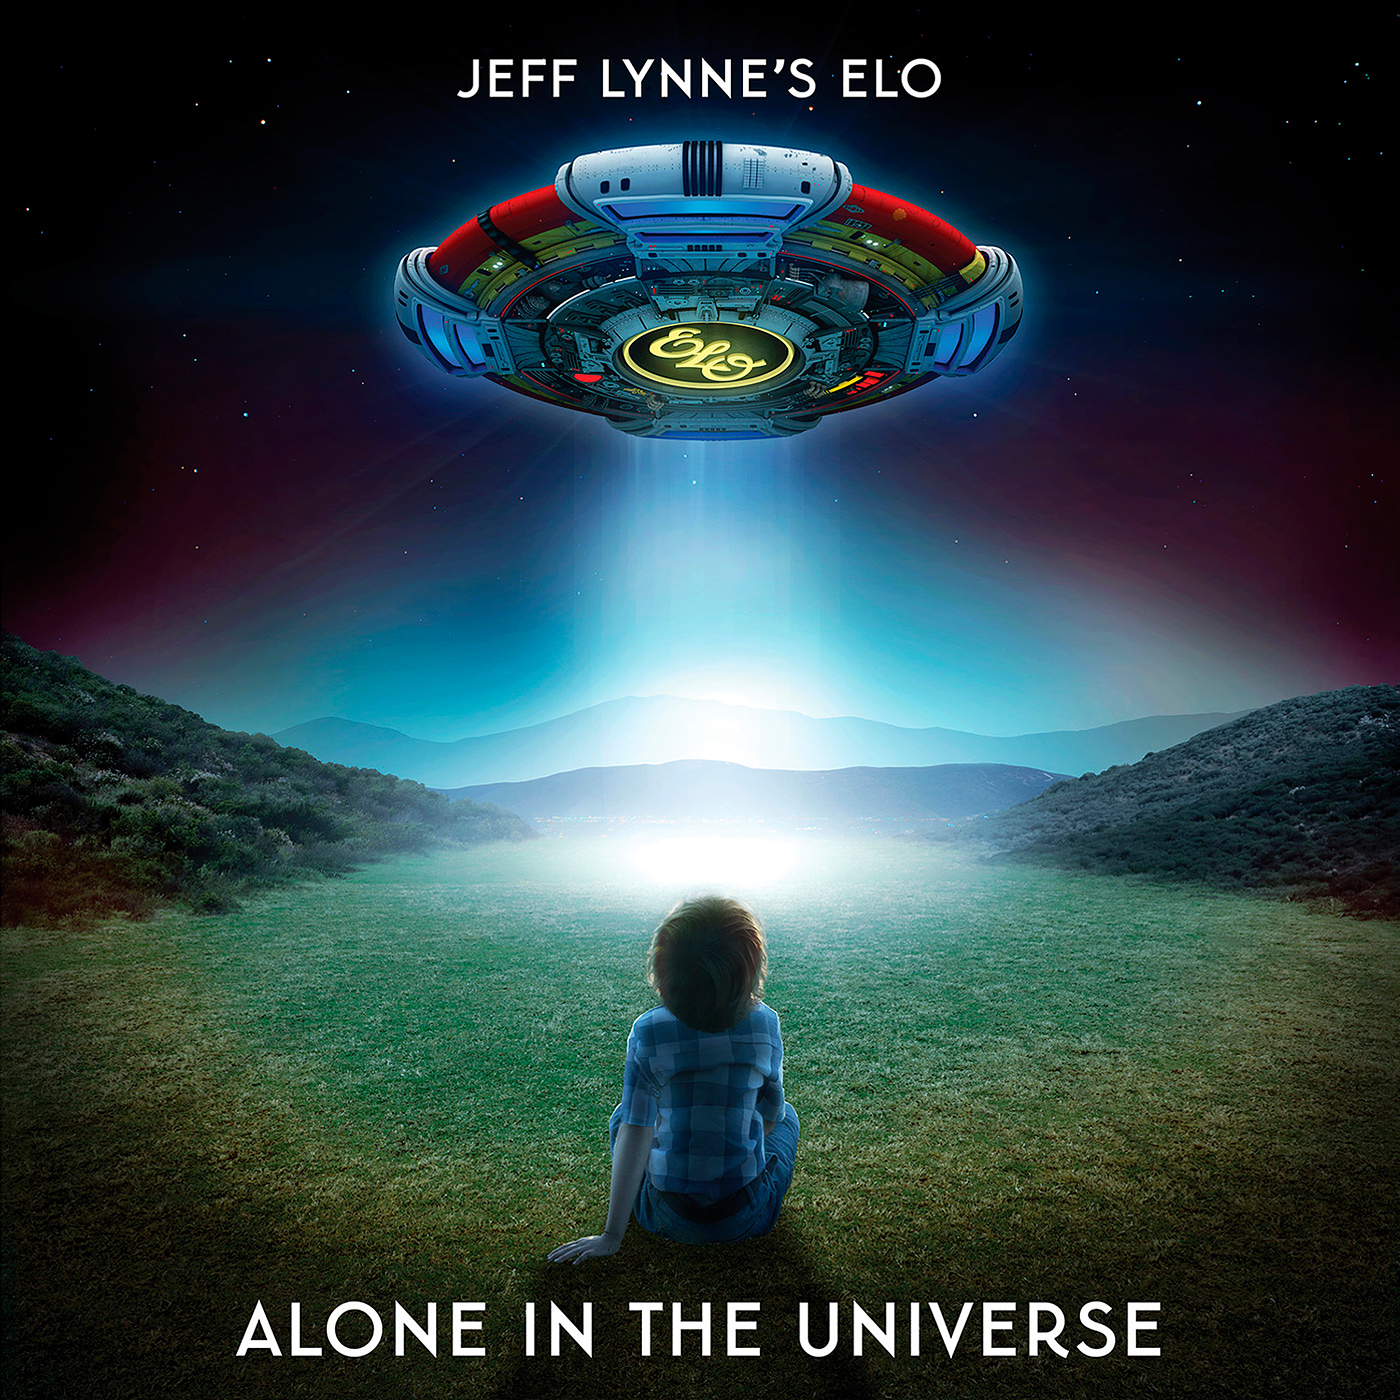 Electric Light Orchestra - Alone In The Universe (2015) [Qobuz FLAC 24bit/96kHz]